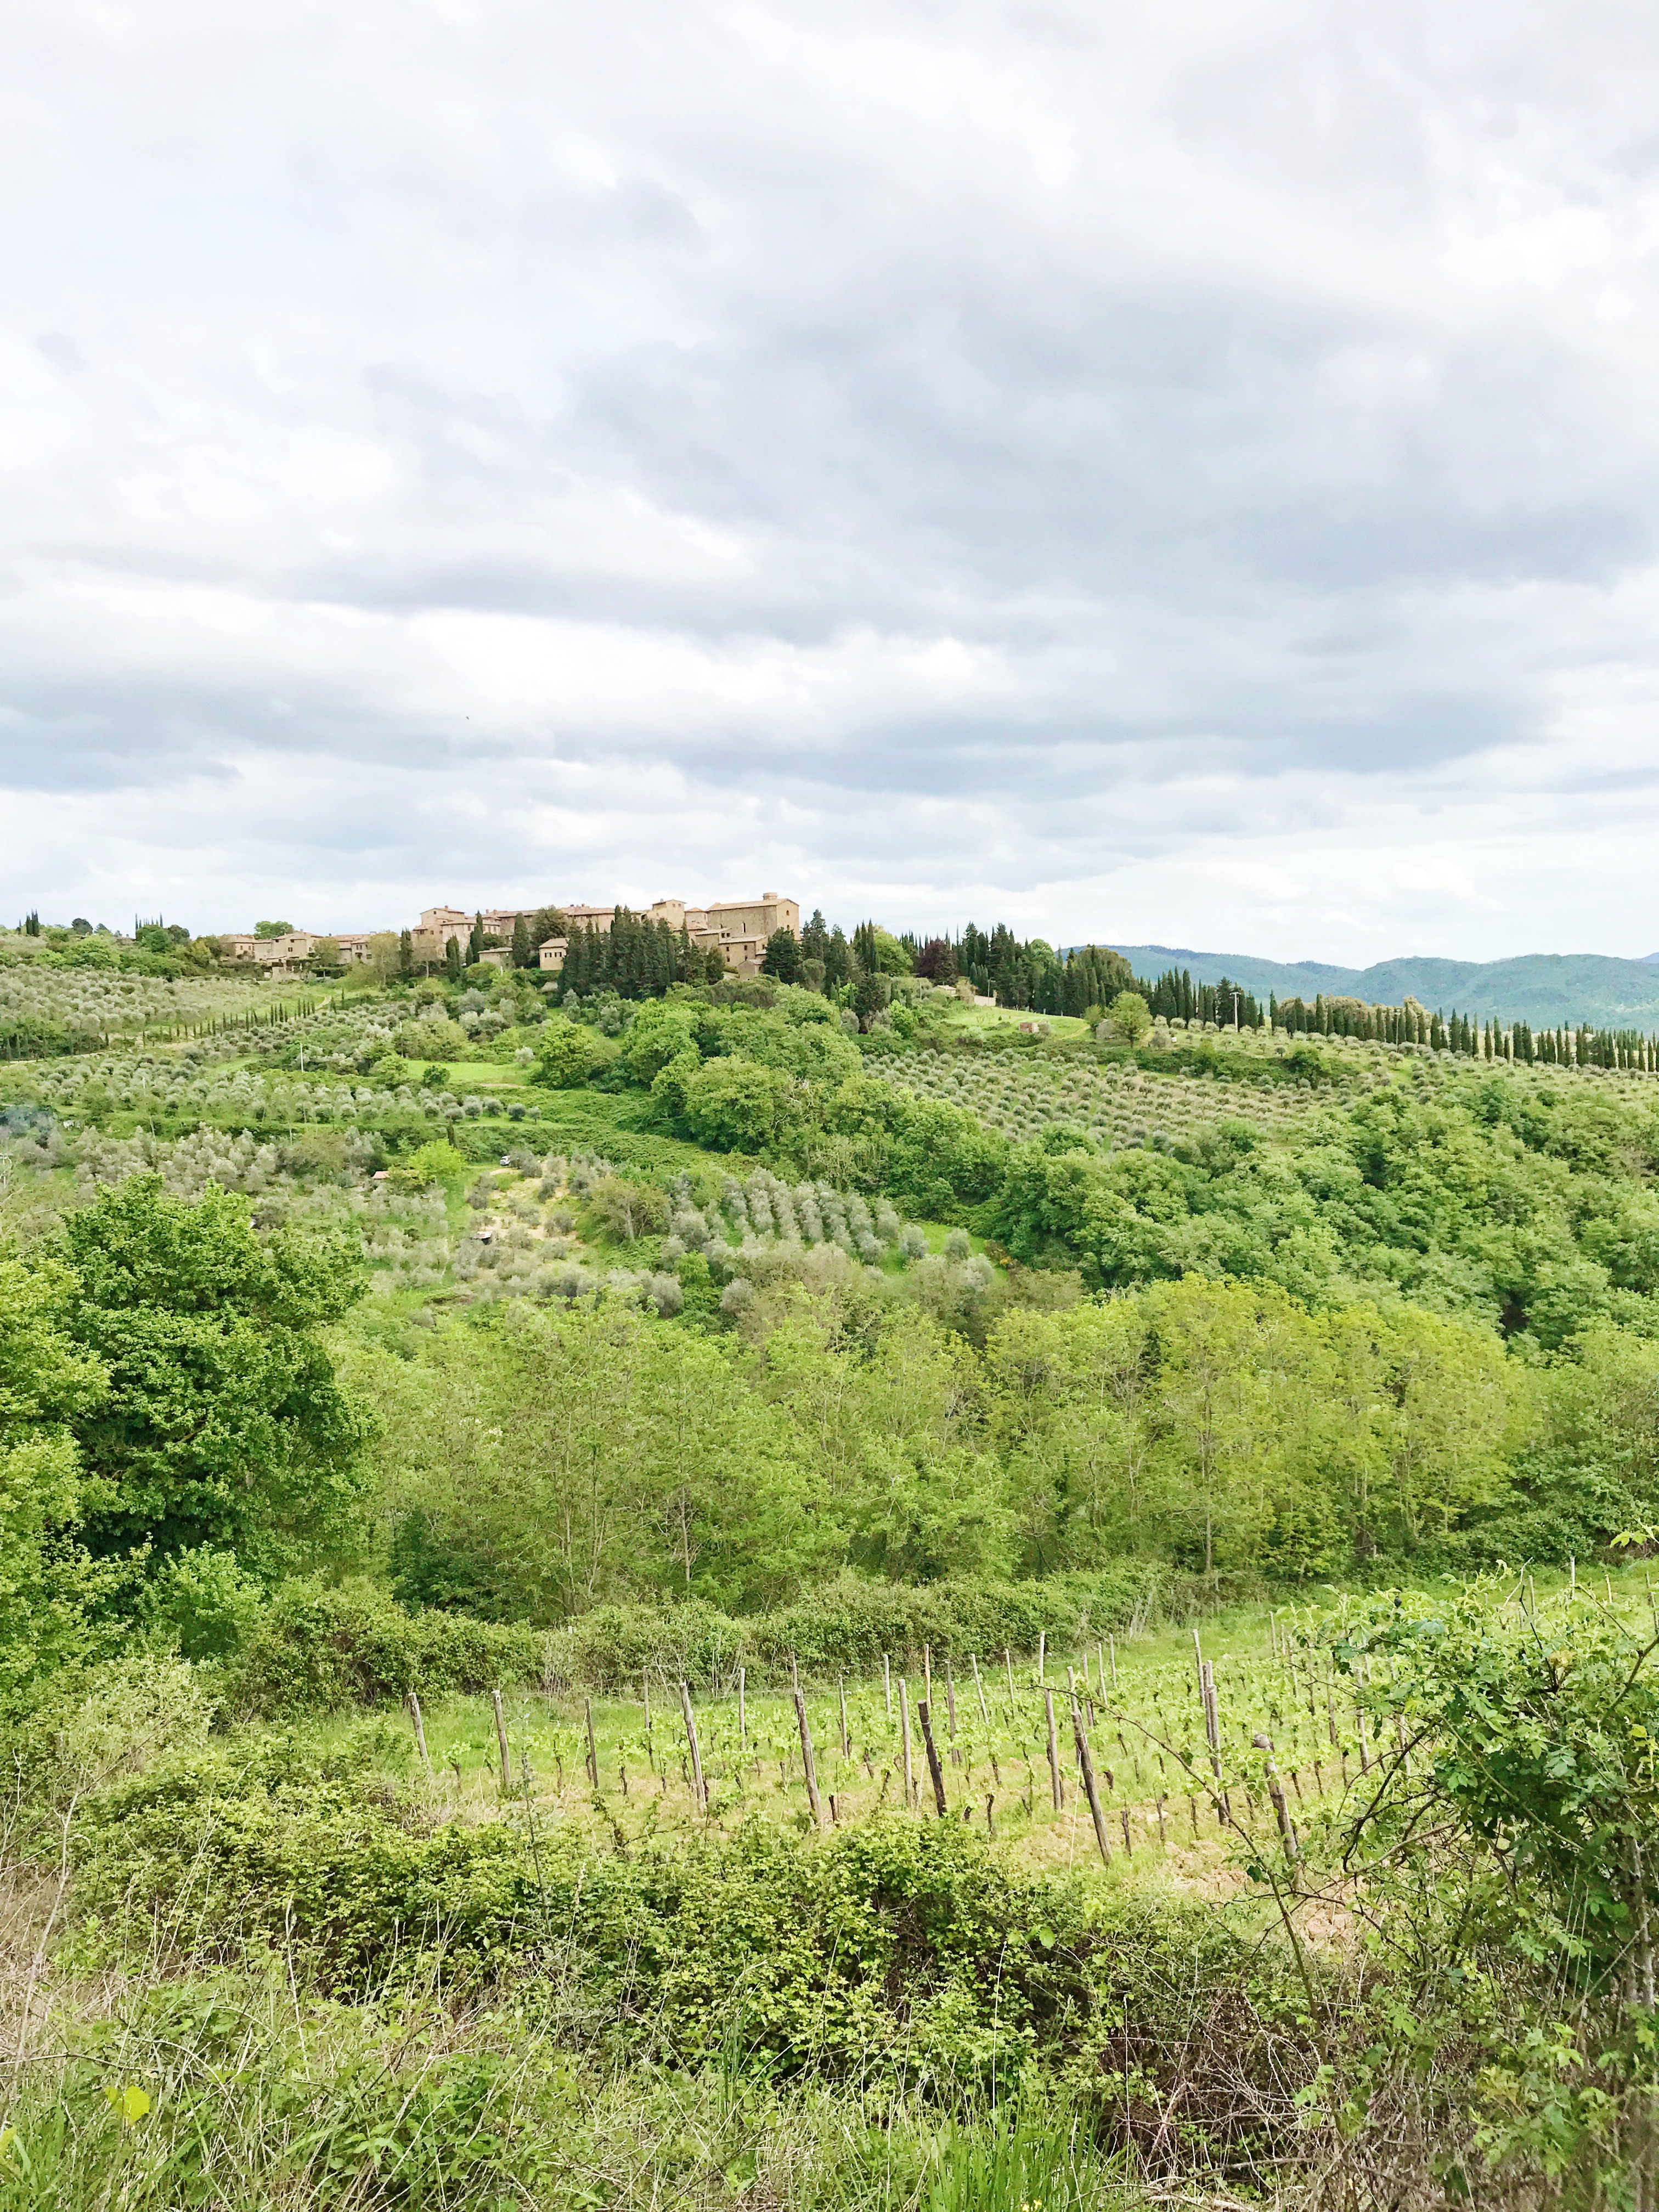 3 Days In Tuscany - Tuscany Itinerary - Where to go in Tuscany Italy - Driving the Chianti Region of Italy - Tuscany Italy Road Trip - Italy Itinerary - What to do in Italy - Communikait by Kait Hanson